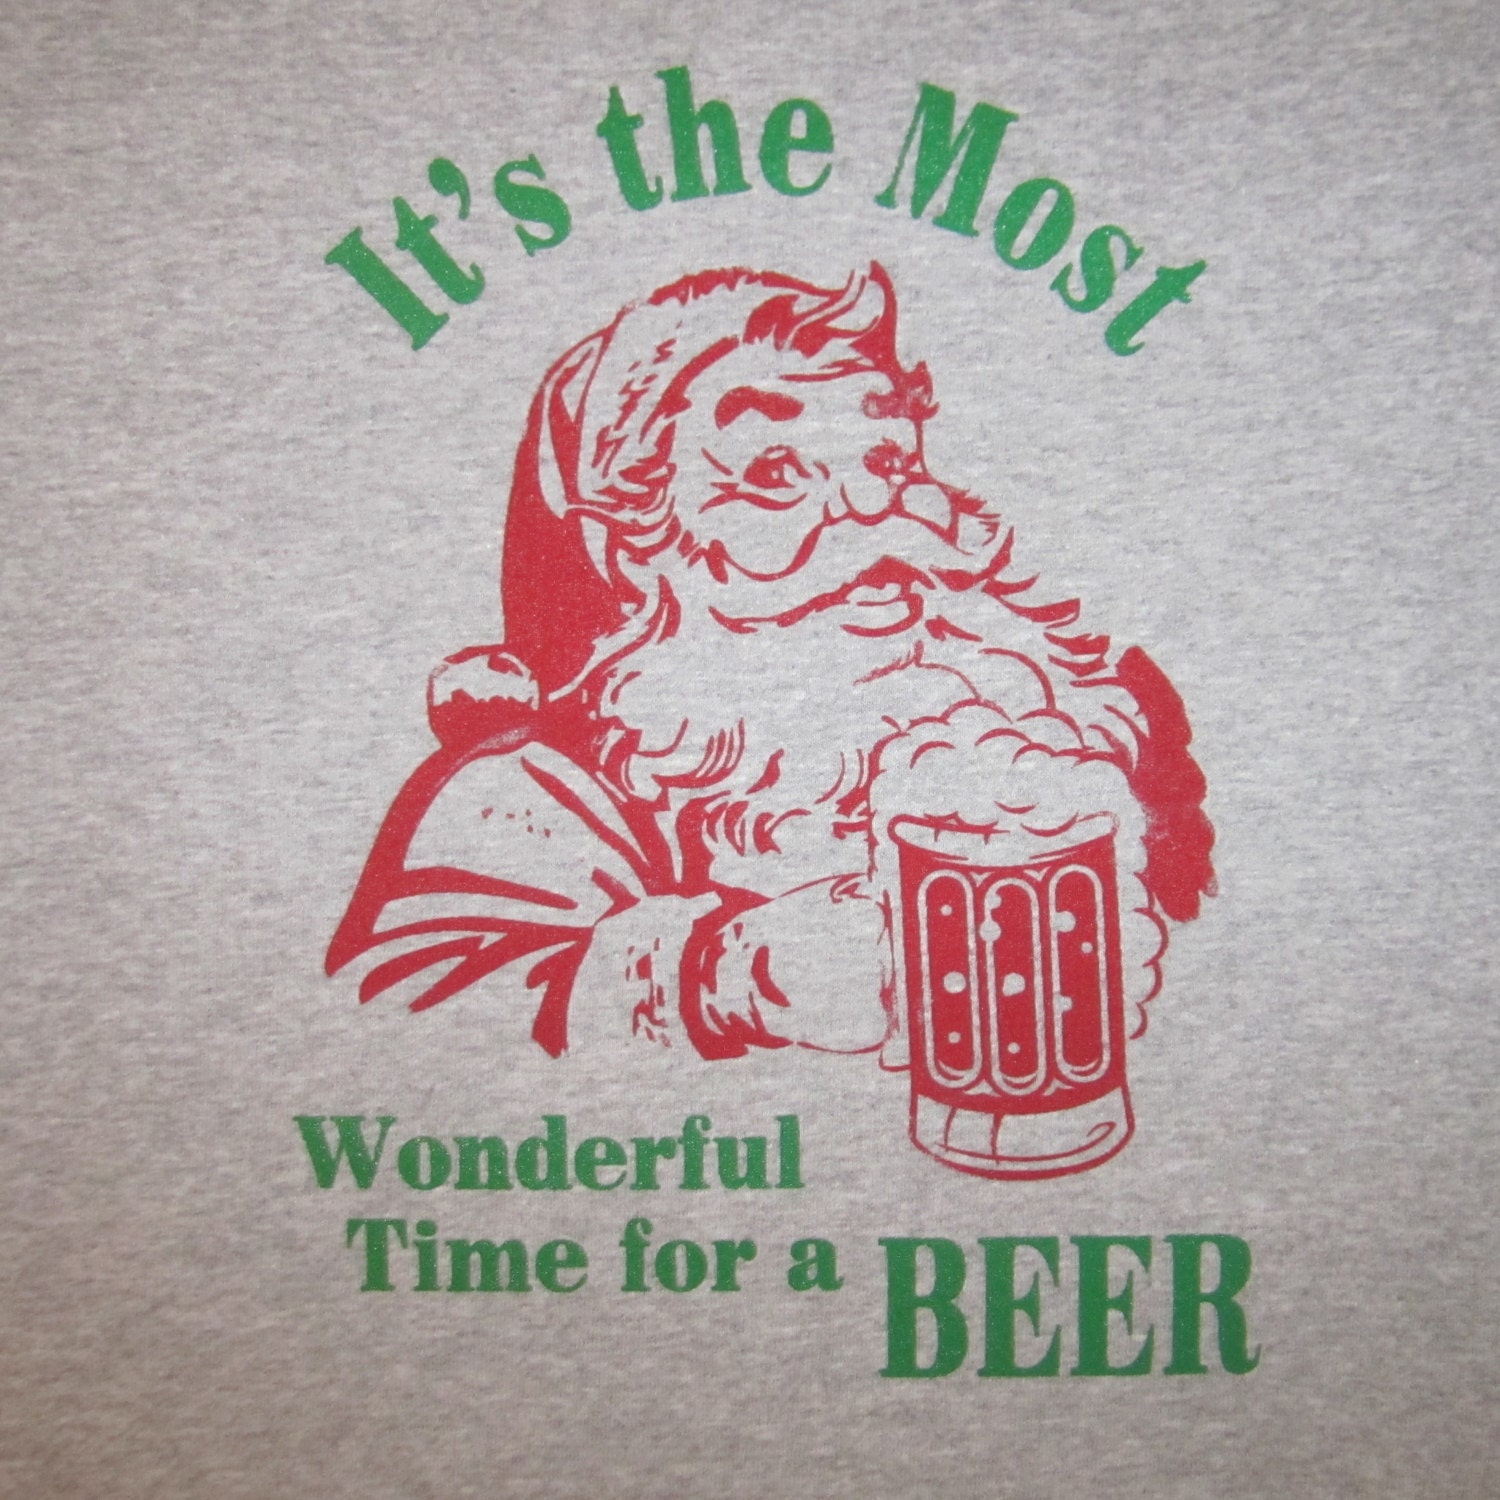 Sweatshirt its the most wonderful time for a beer funny | Etsy